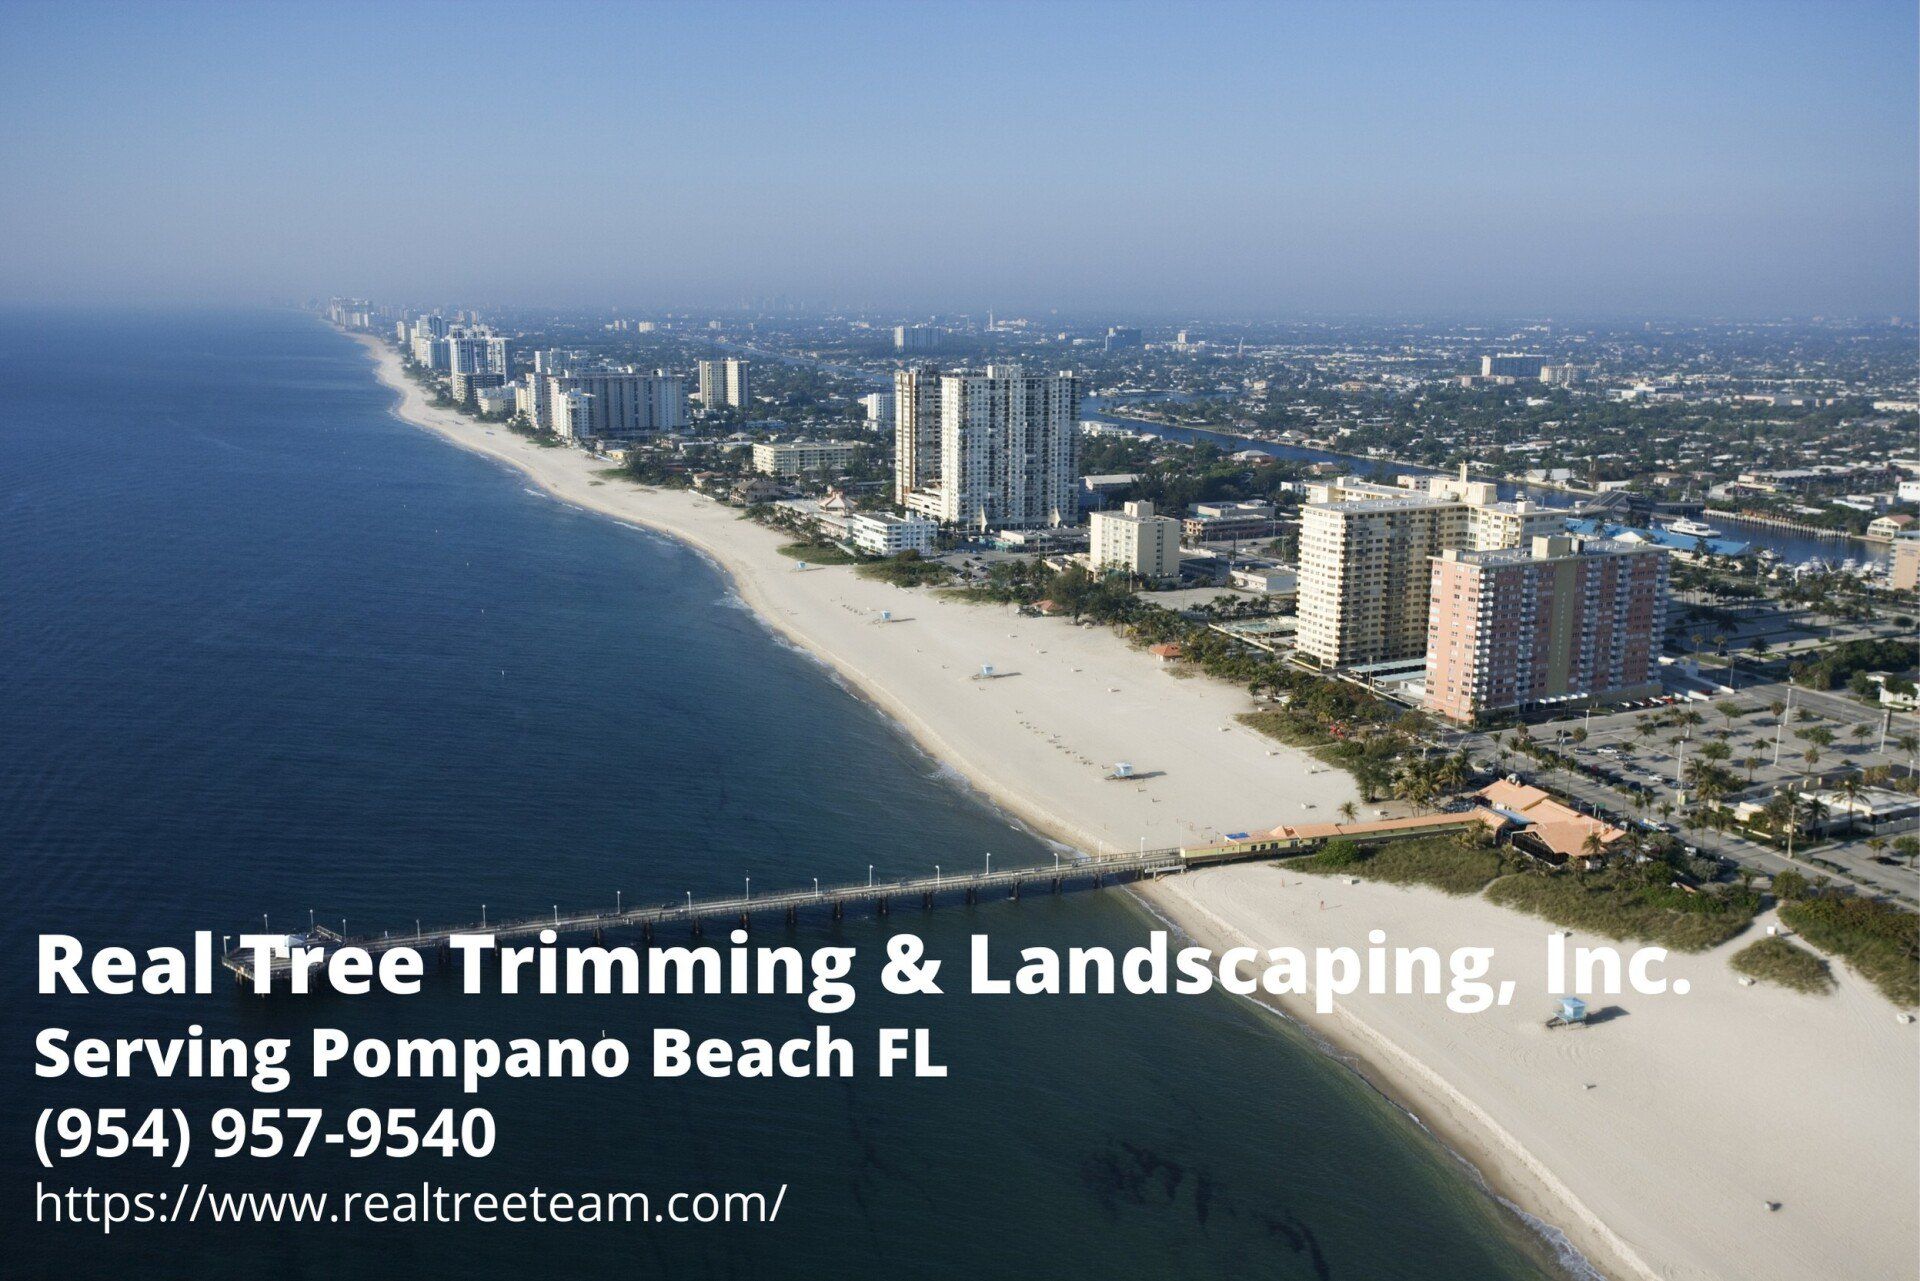 aerial view of Pompano Beach with the contact details of Real Tree Trimming & Landscaping, Inc. - a tree company serving Pompano Beach FL